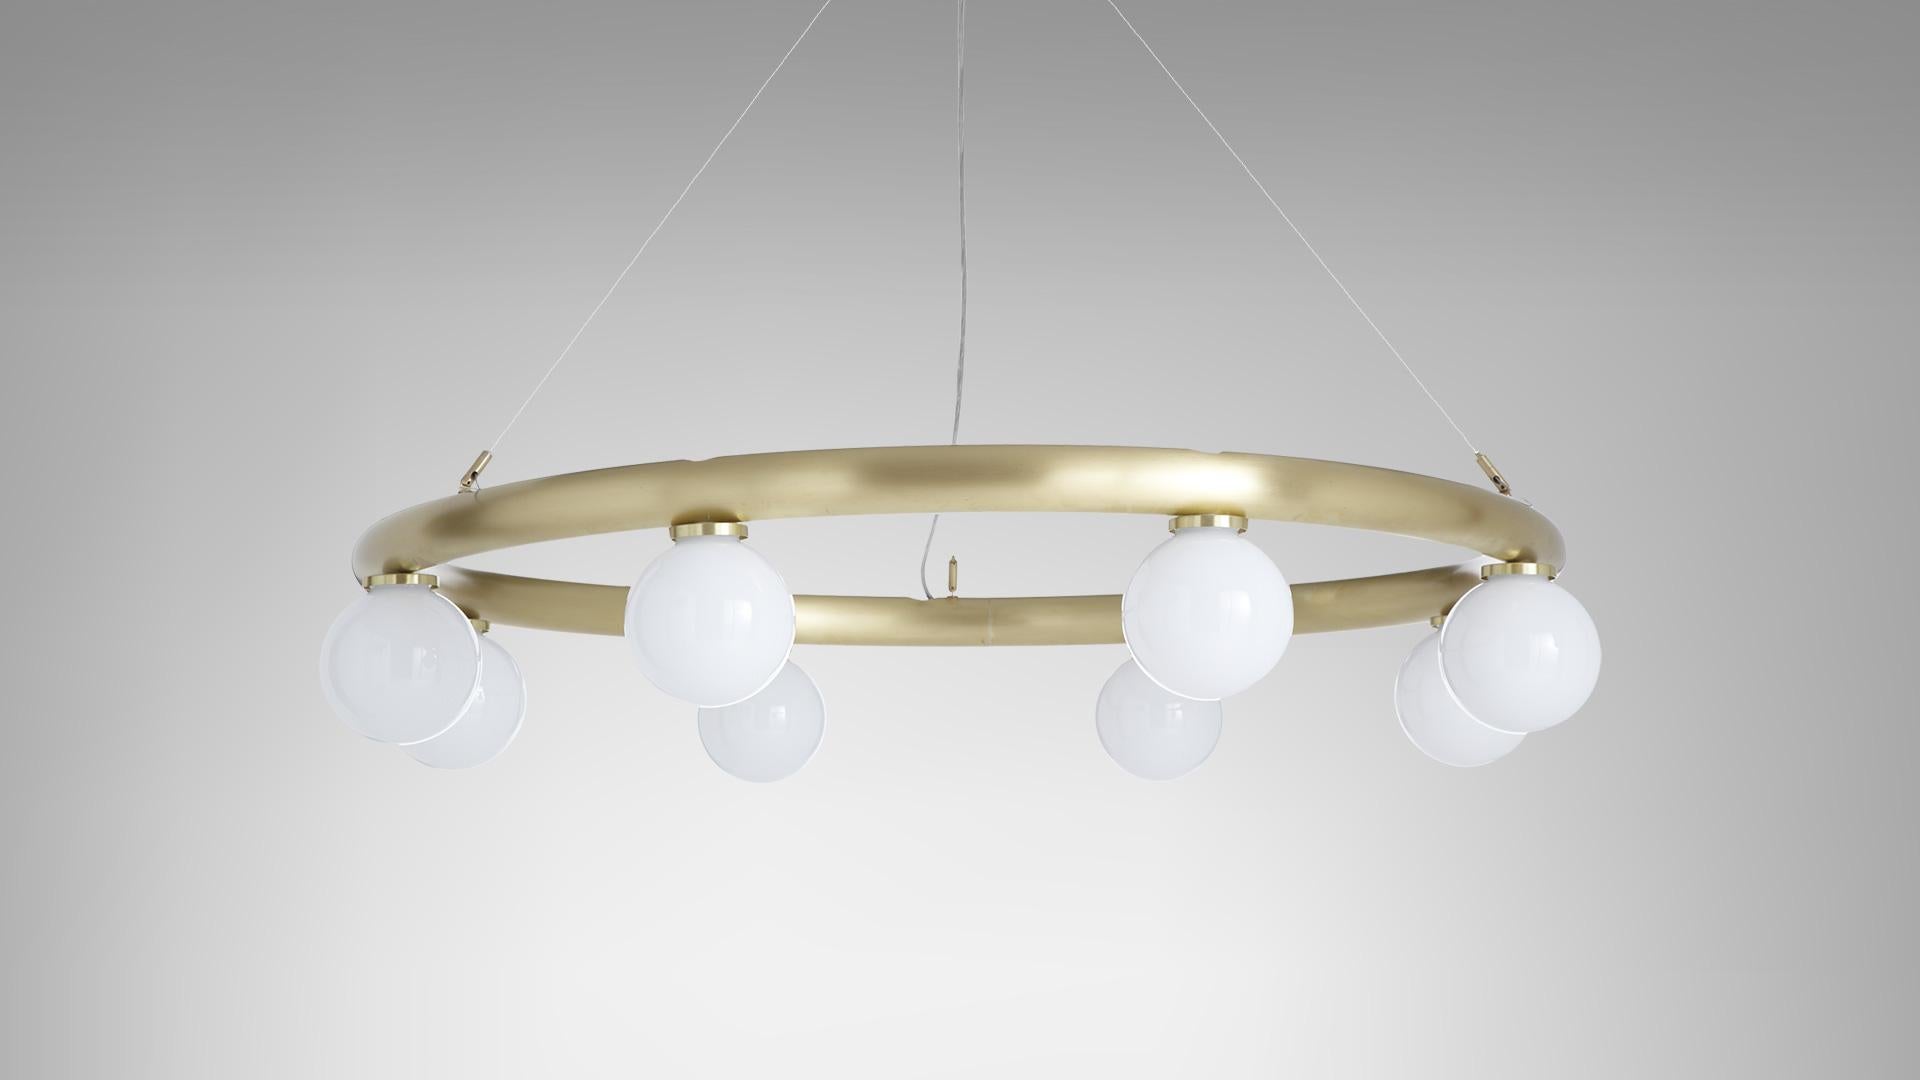 Orb pendant by CTO Lighting
Materials: Satin brass, opal glass shades, stainless steel suspension wire/clear flex
Dimensions: W 120 x D 120 x H 20 cm 

8 x G9, 25w max halogen (or 2.3w LED 2700k)
weight 11kg (24.3lbs)
supplied with 2000mm (78.8”)